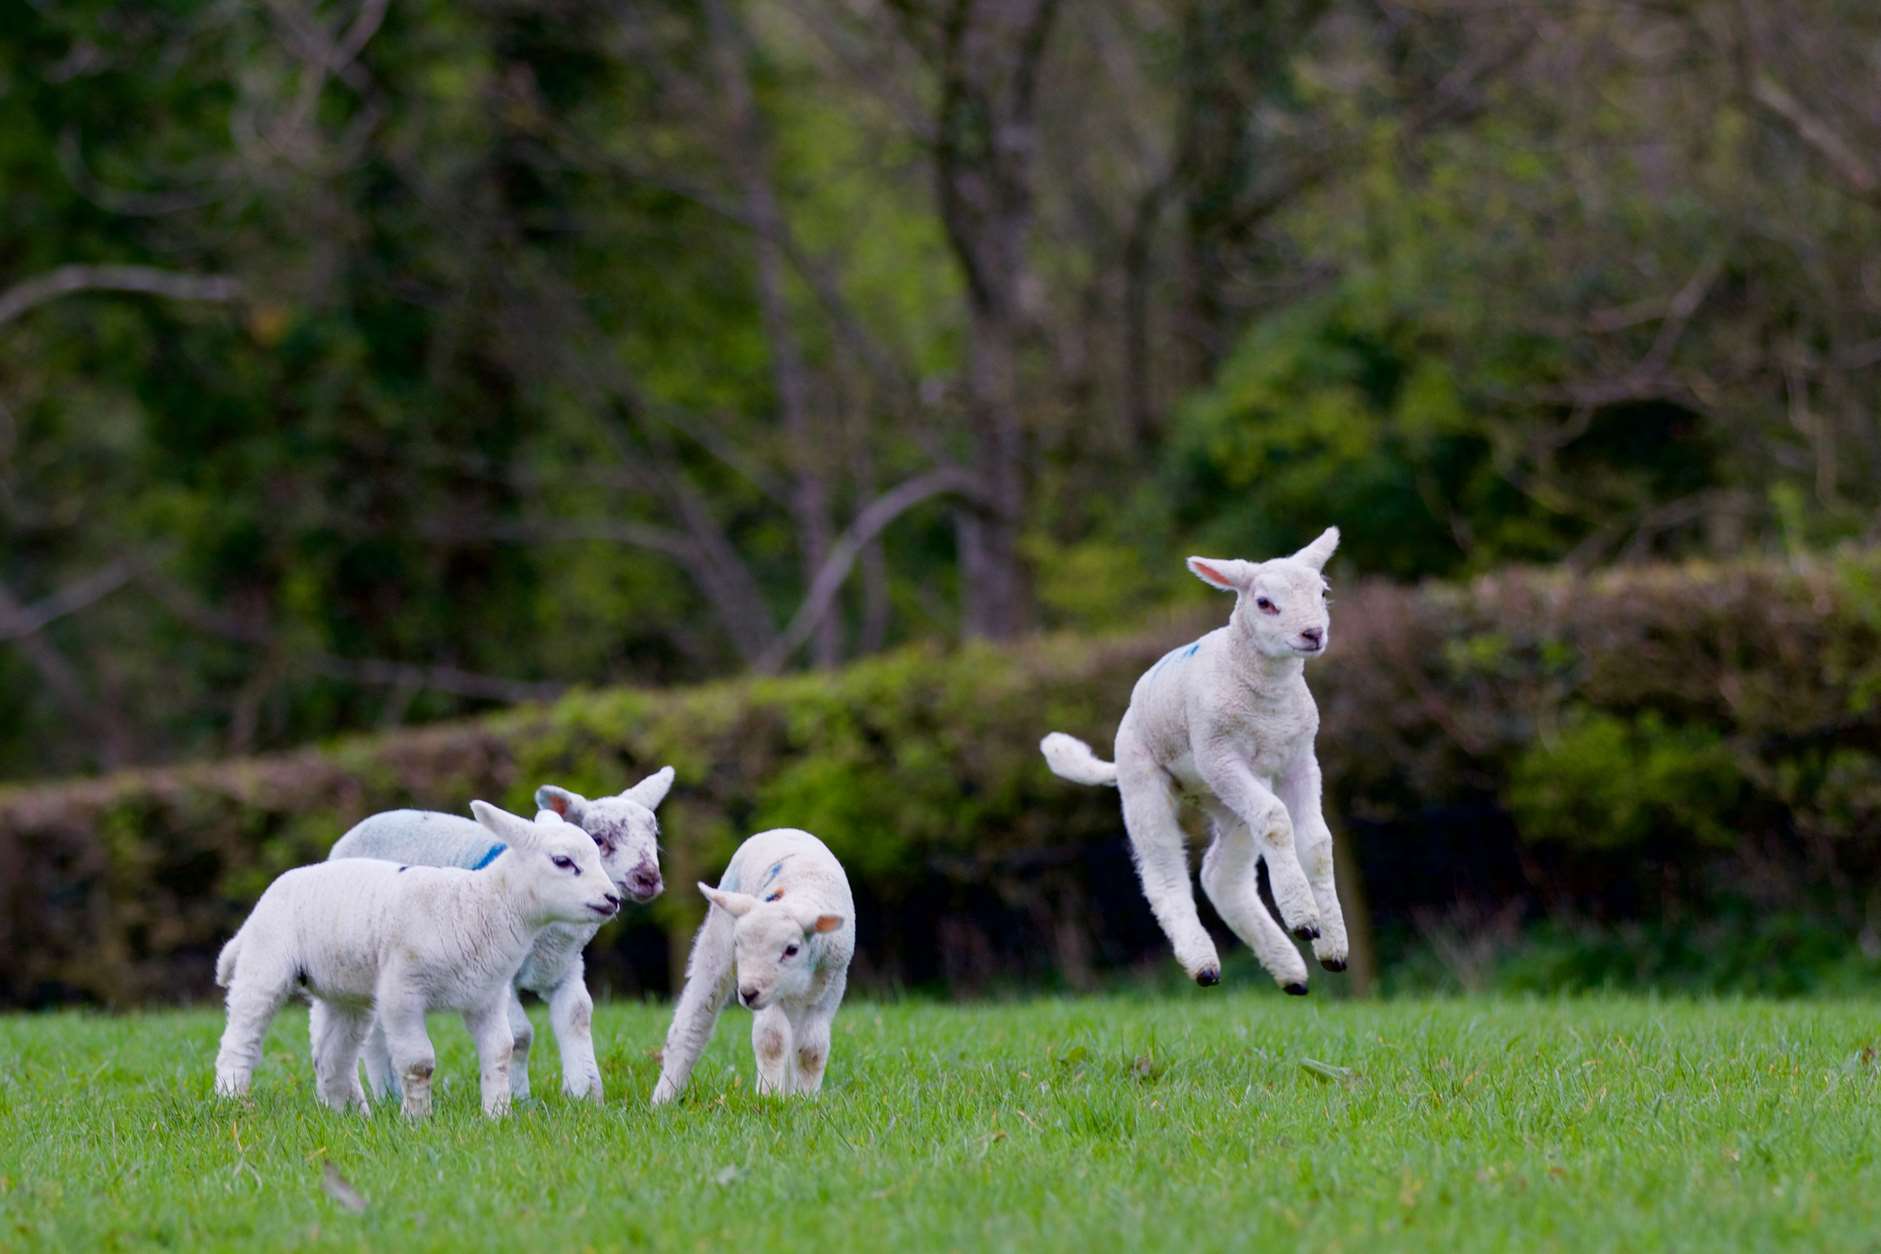 Lambs have a spring in their step